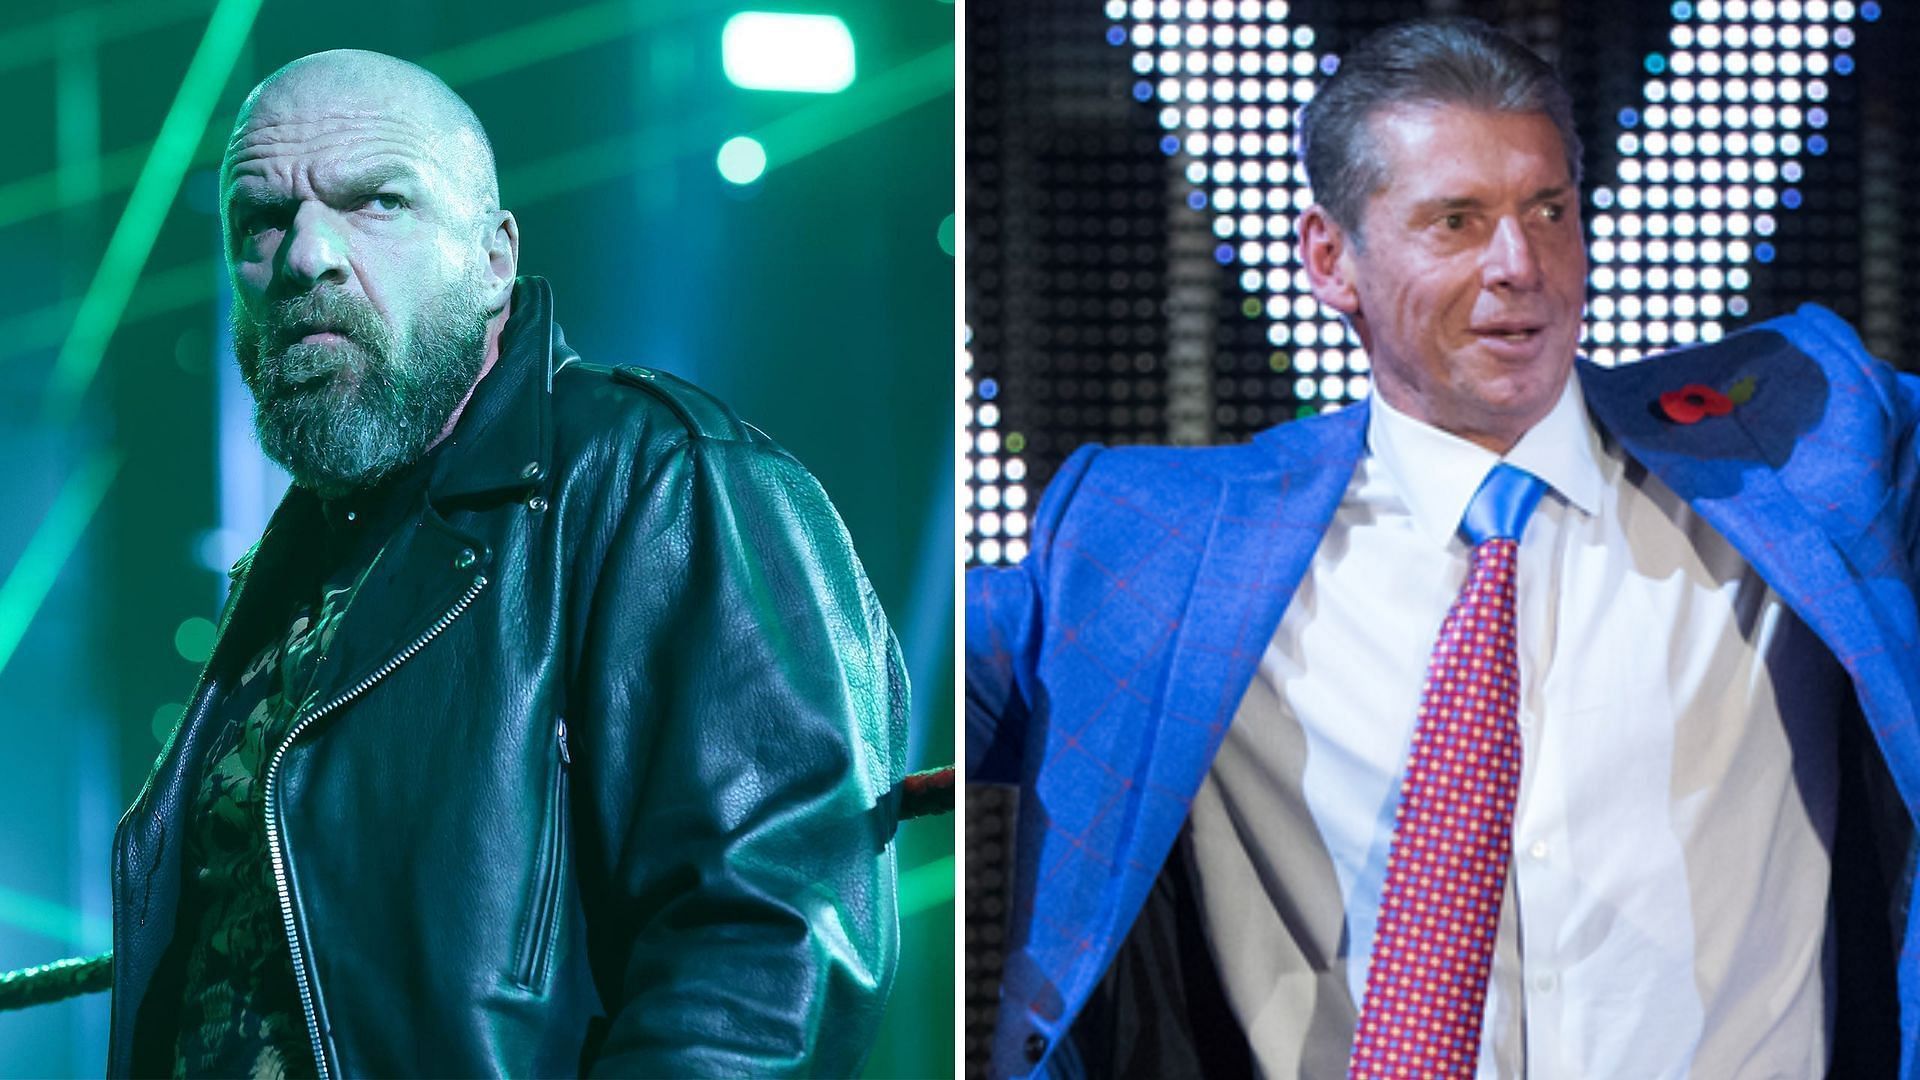 Triple H has made big chances since taking over from Vince McMahon